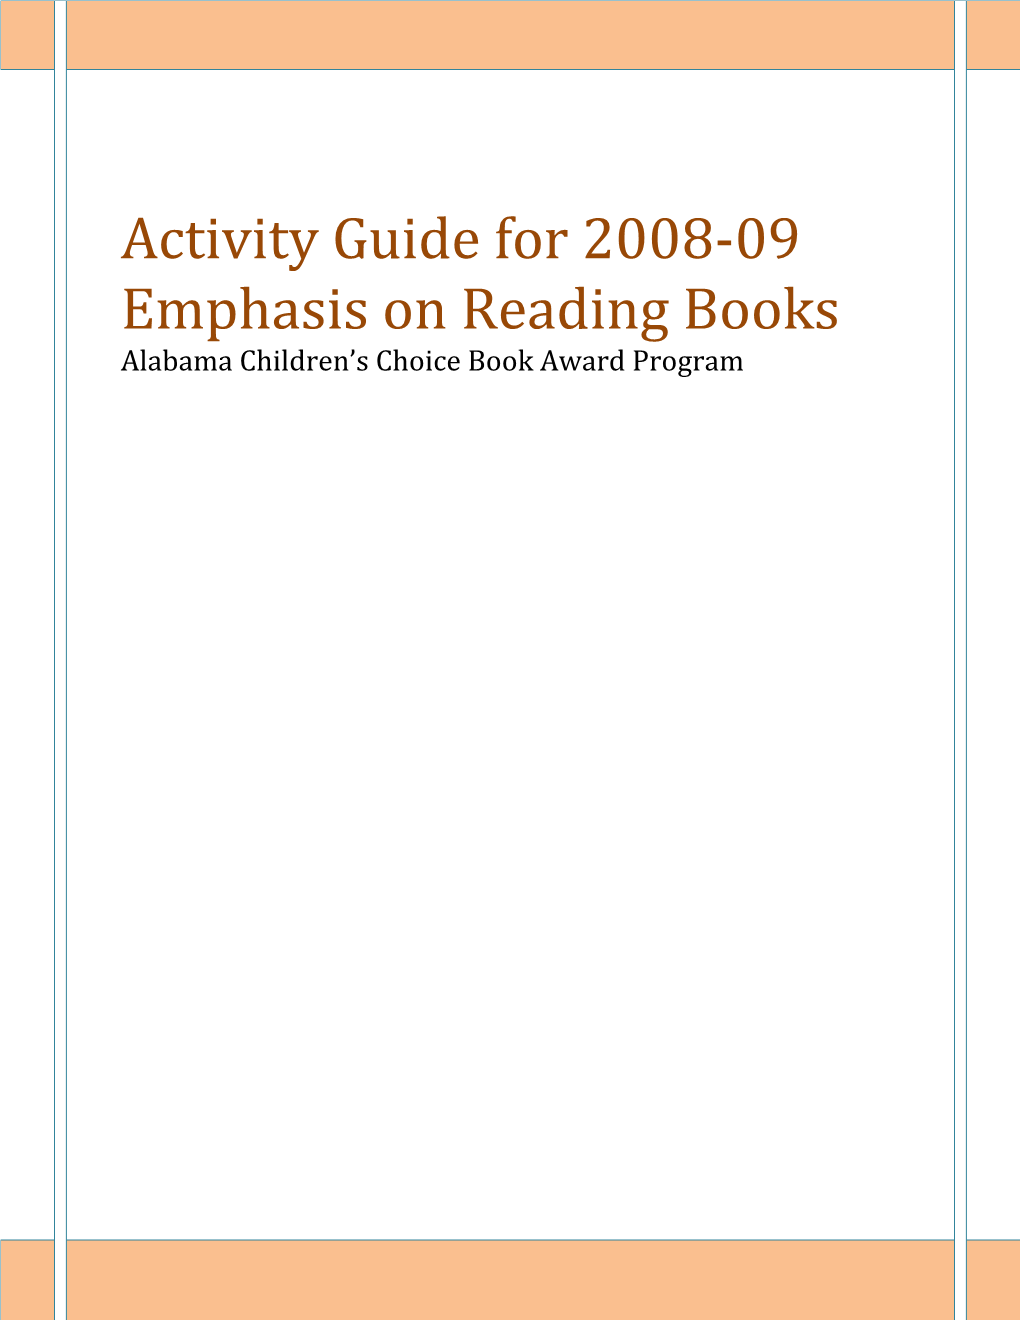 Activity Guide For 2008-09 Emphasis On Reading Books